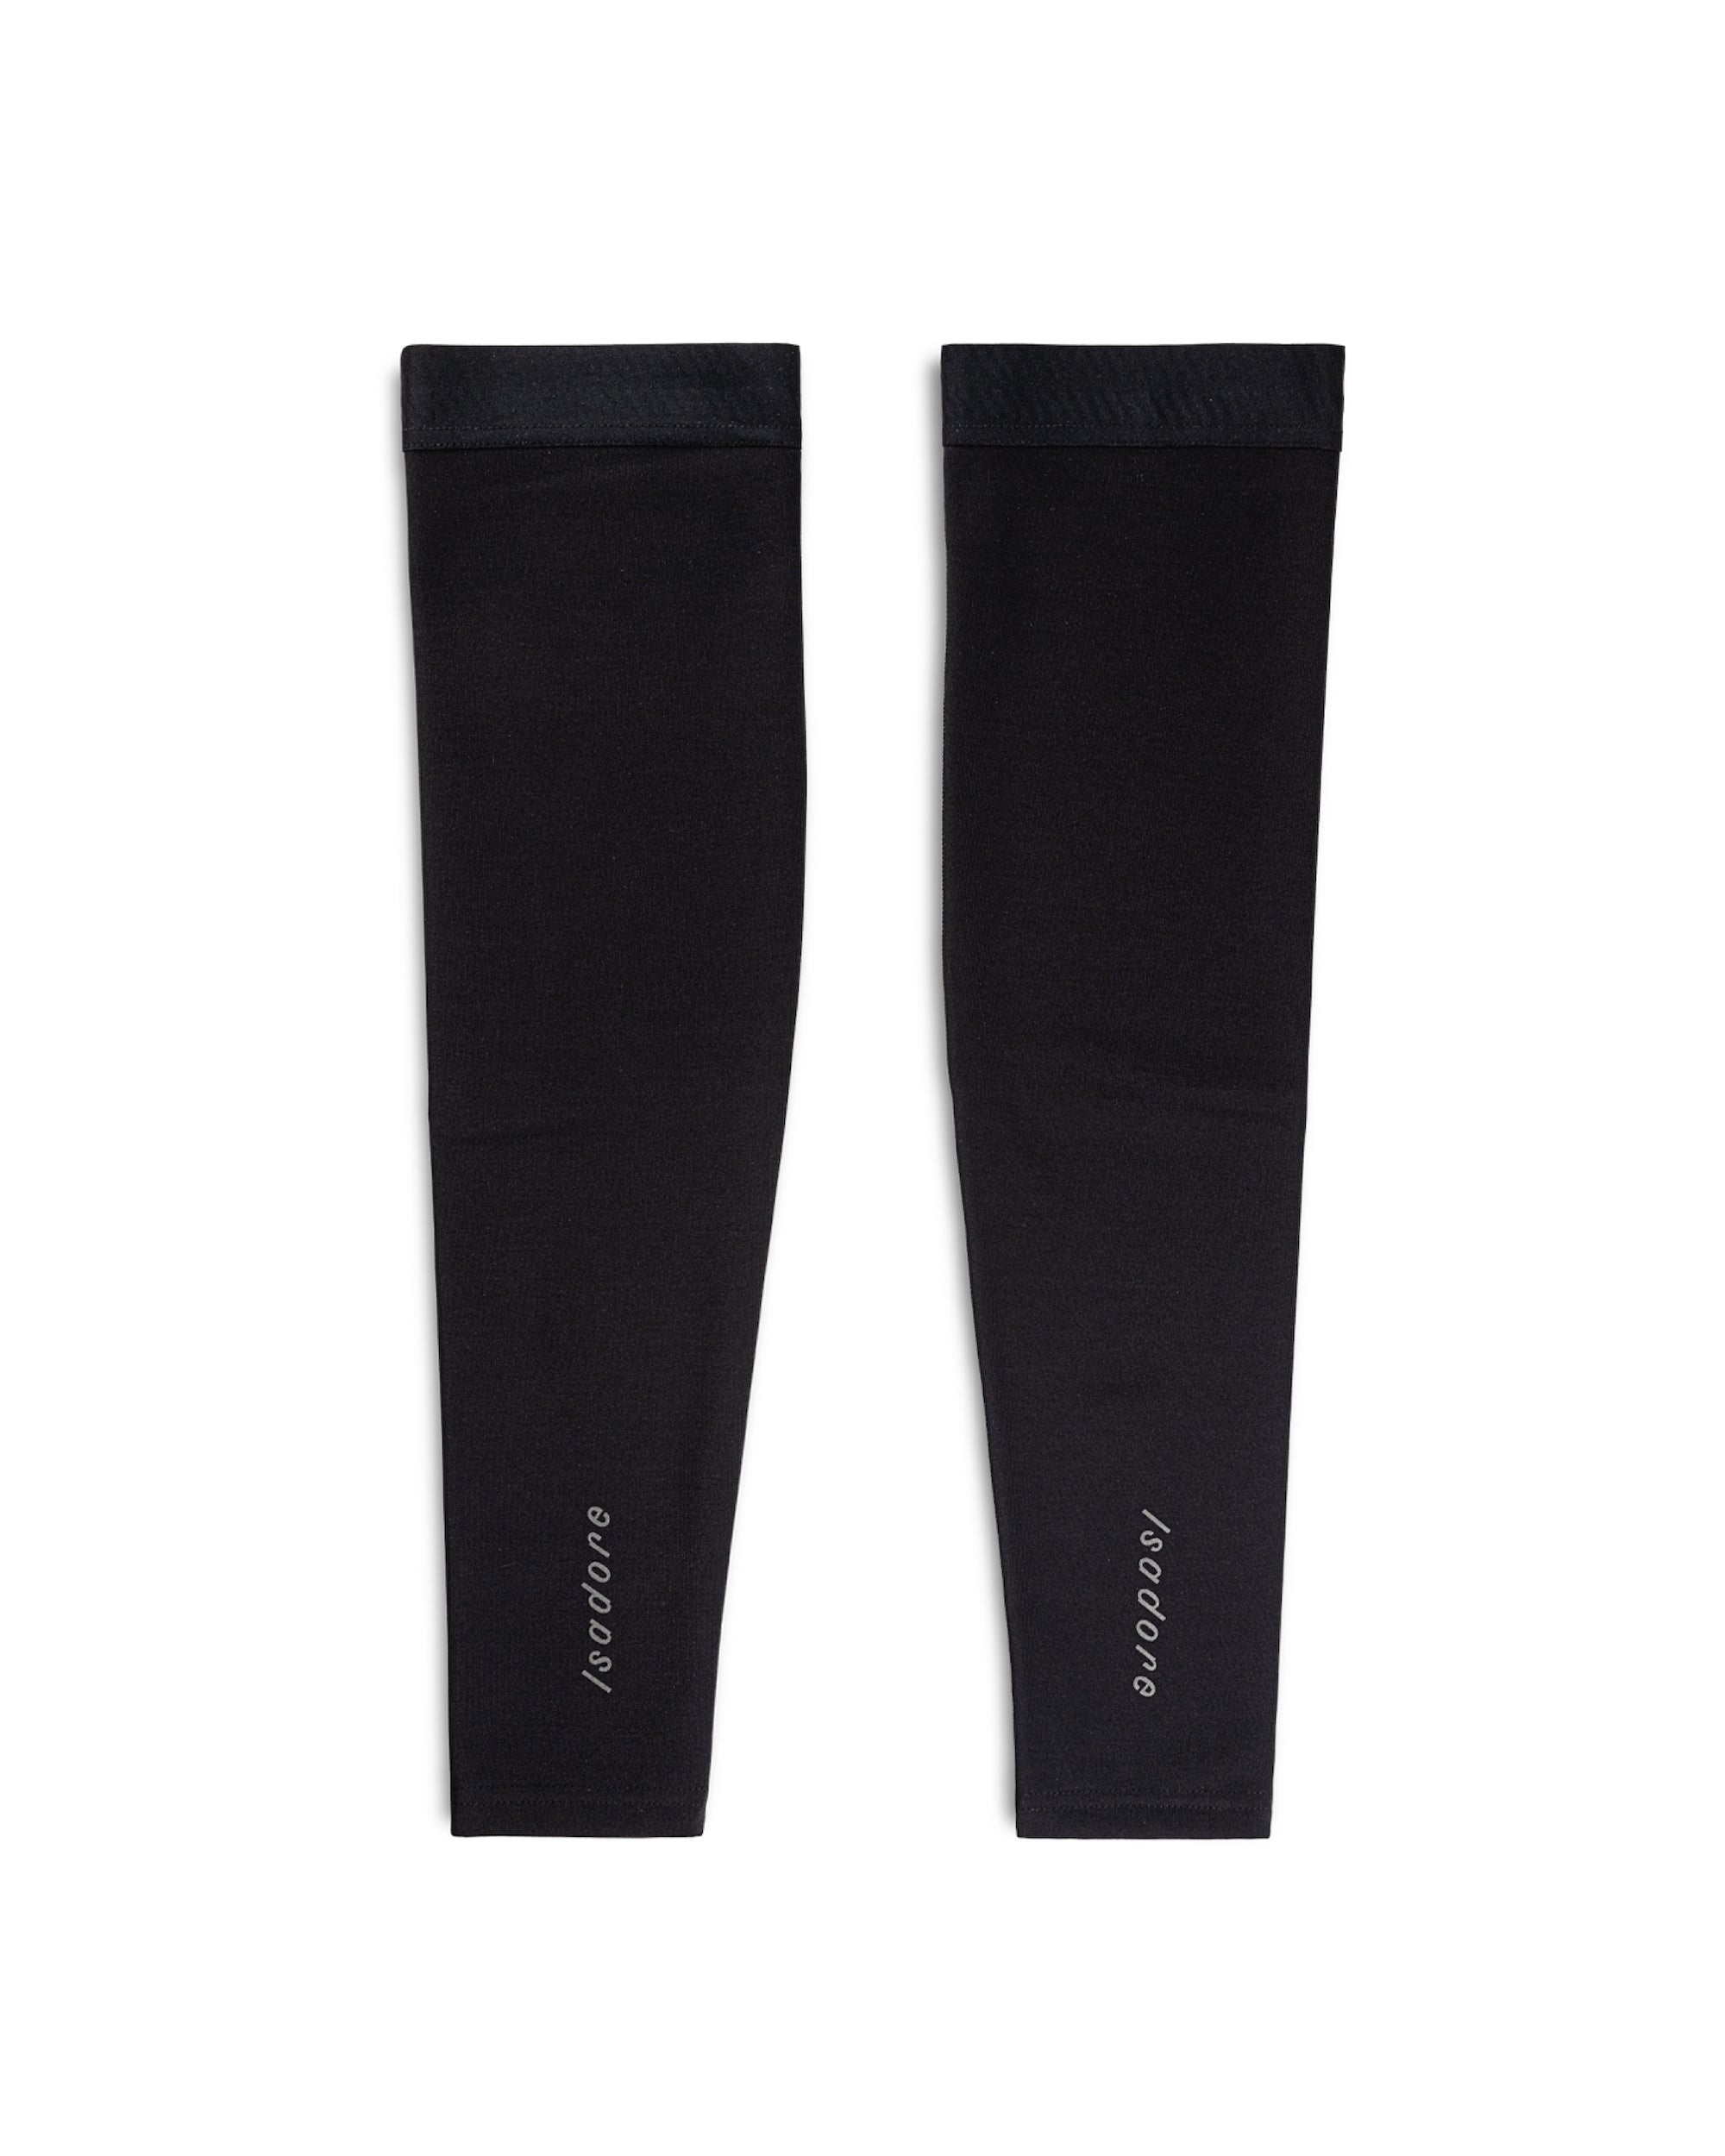 Signature Arm Warmers